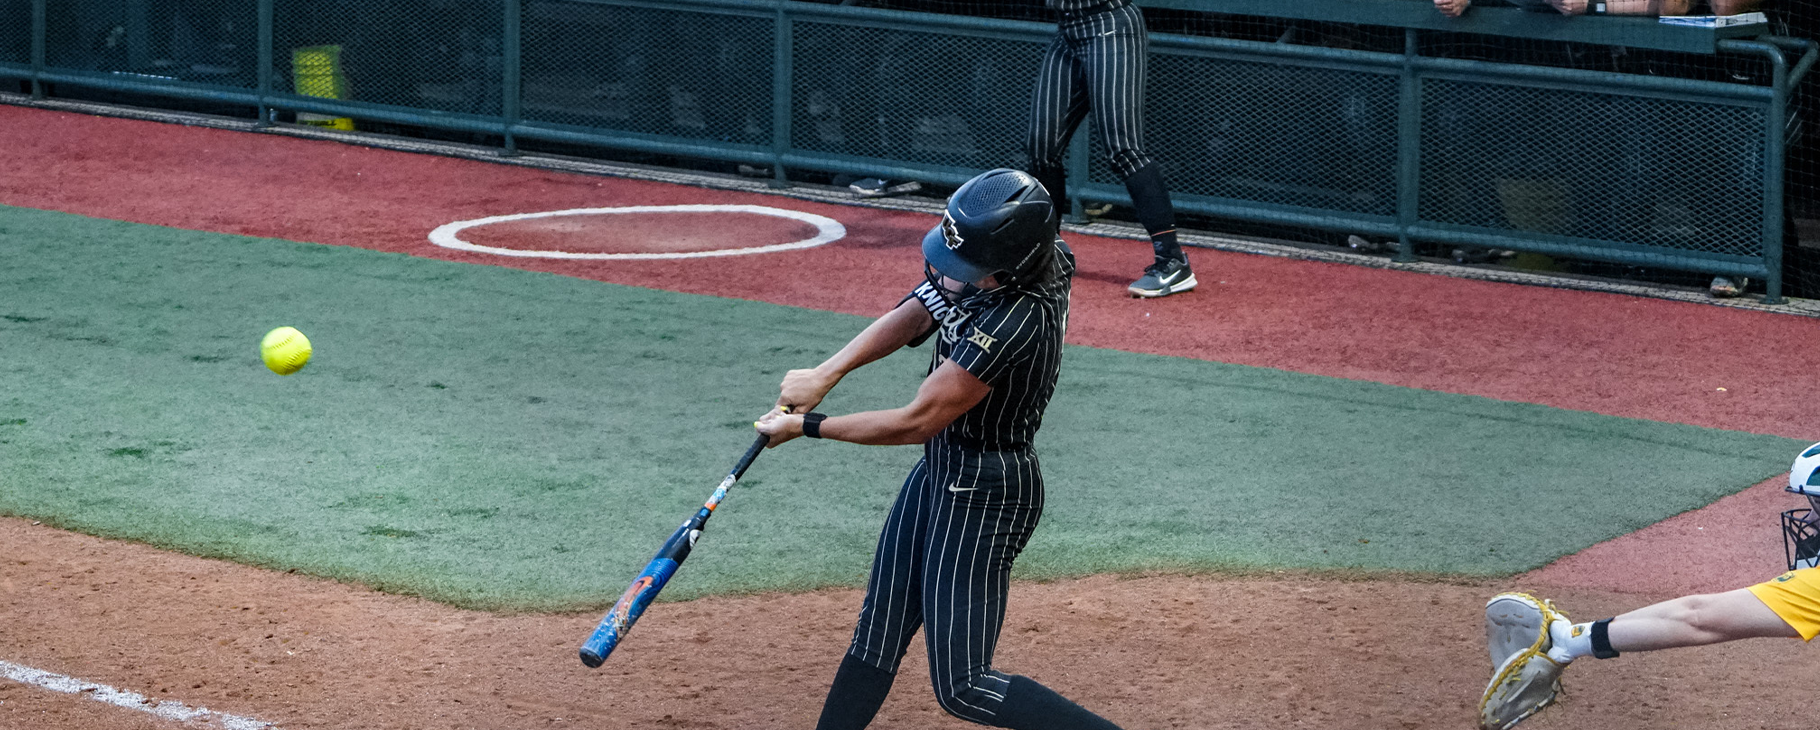 Softball defeated by Baylor, 2-1, in Series Opener – UCF Athletics